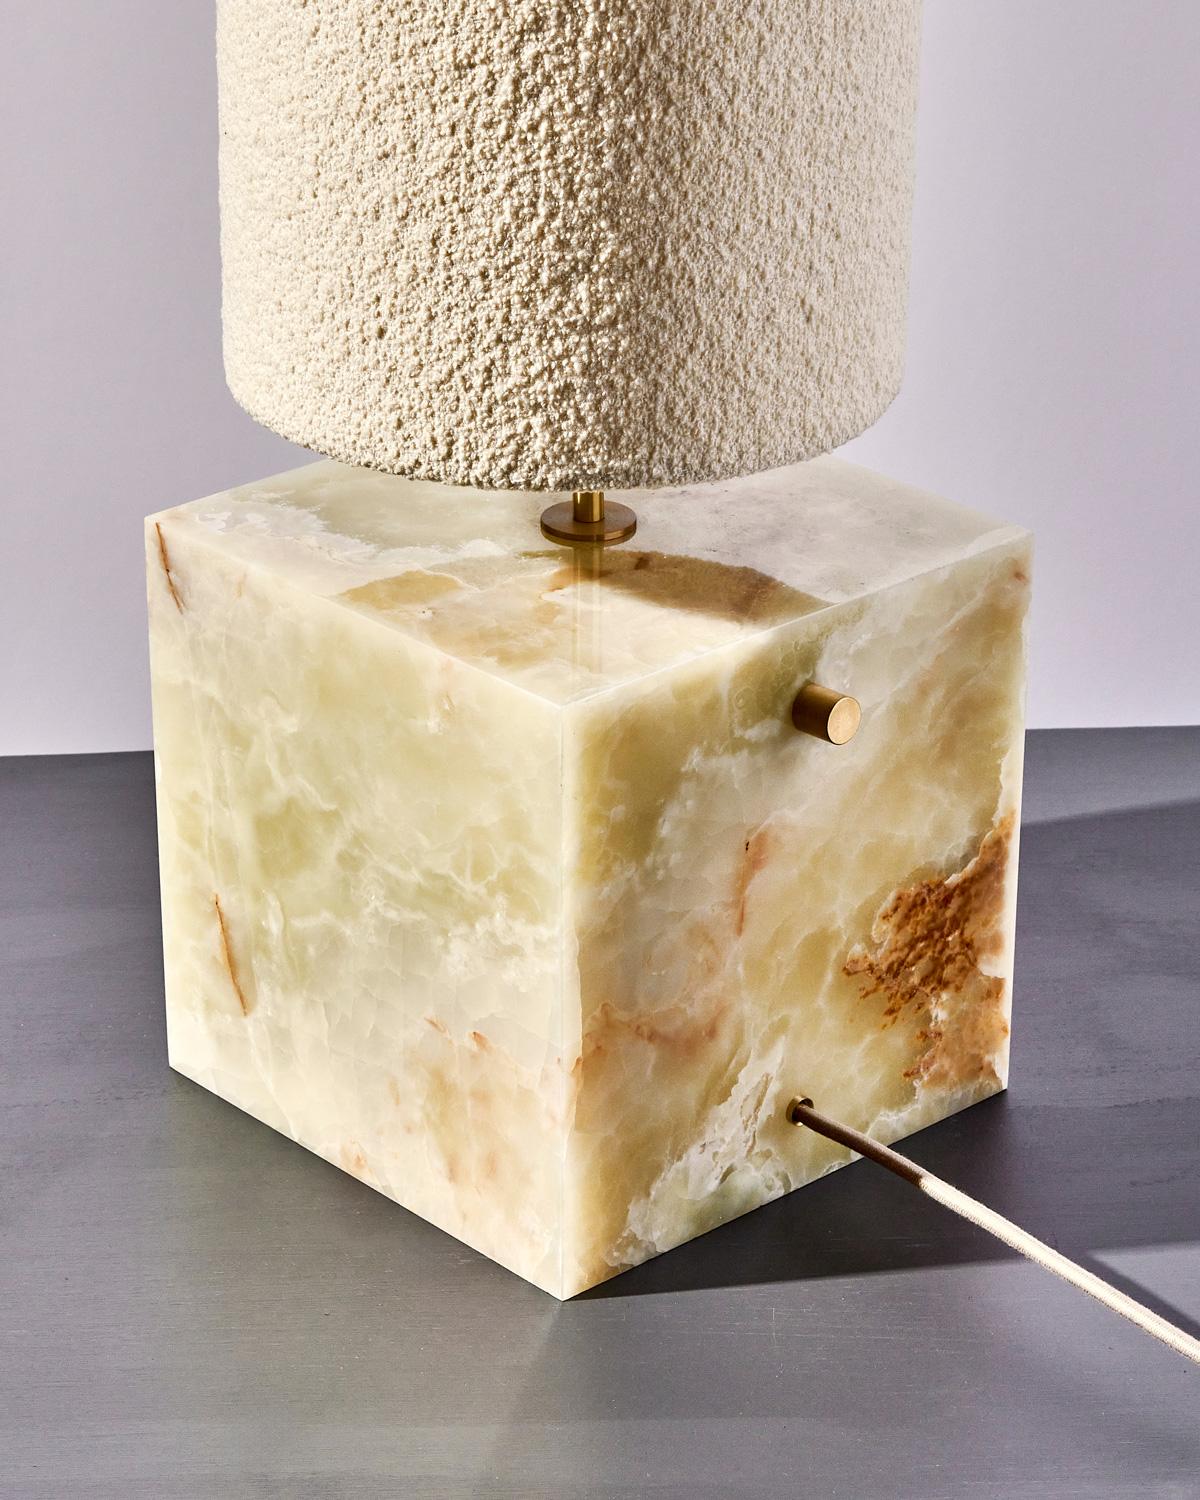 The coexist table lamp in Green Onyx and Bouclé Shade is a play on texture and color.

The lamp serves as a sculptural centerpiece for any room, emitting a soft warm light to draw the viewer into the materials. The bold geometry of the cube base